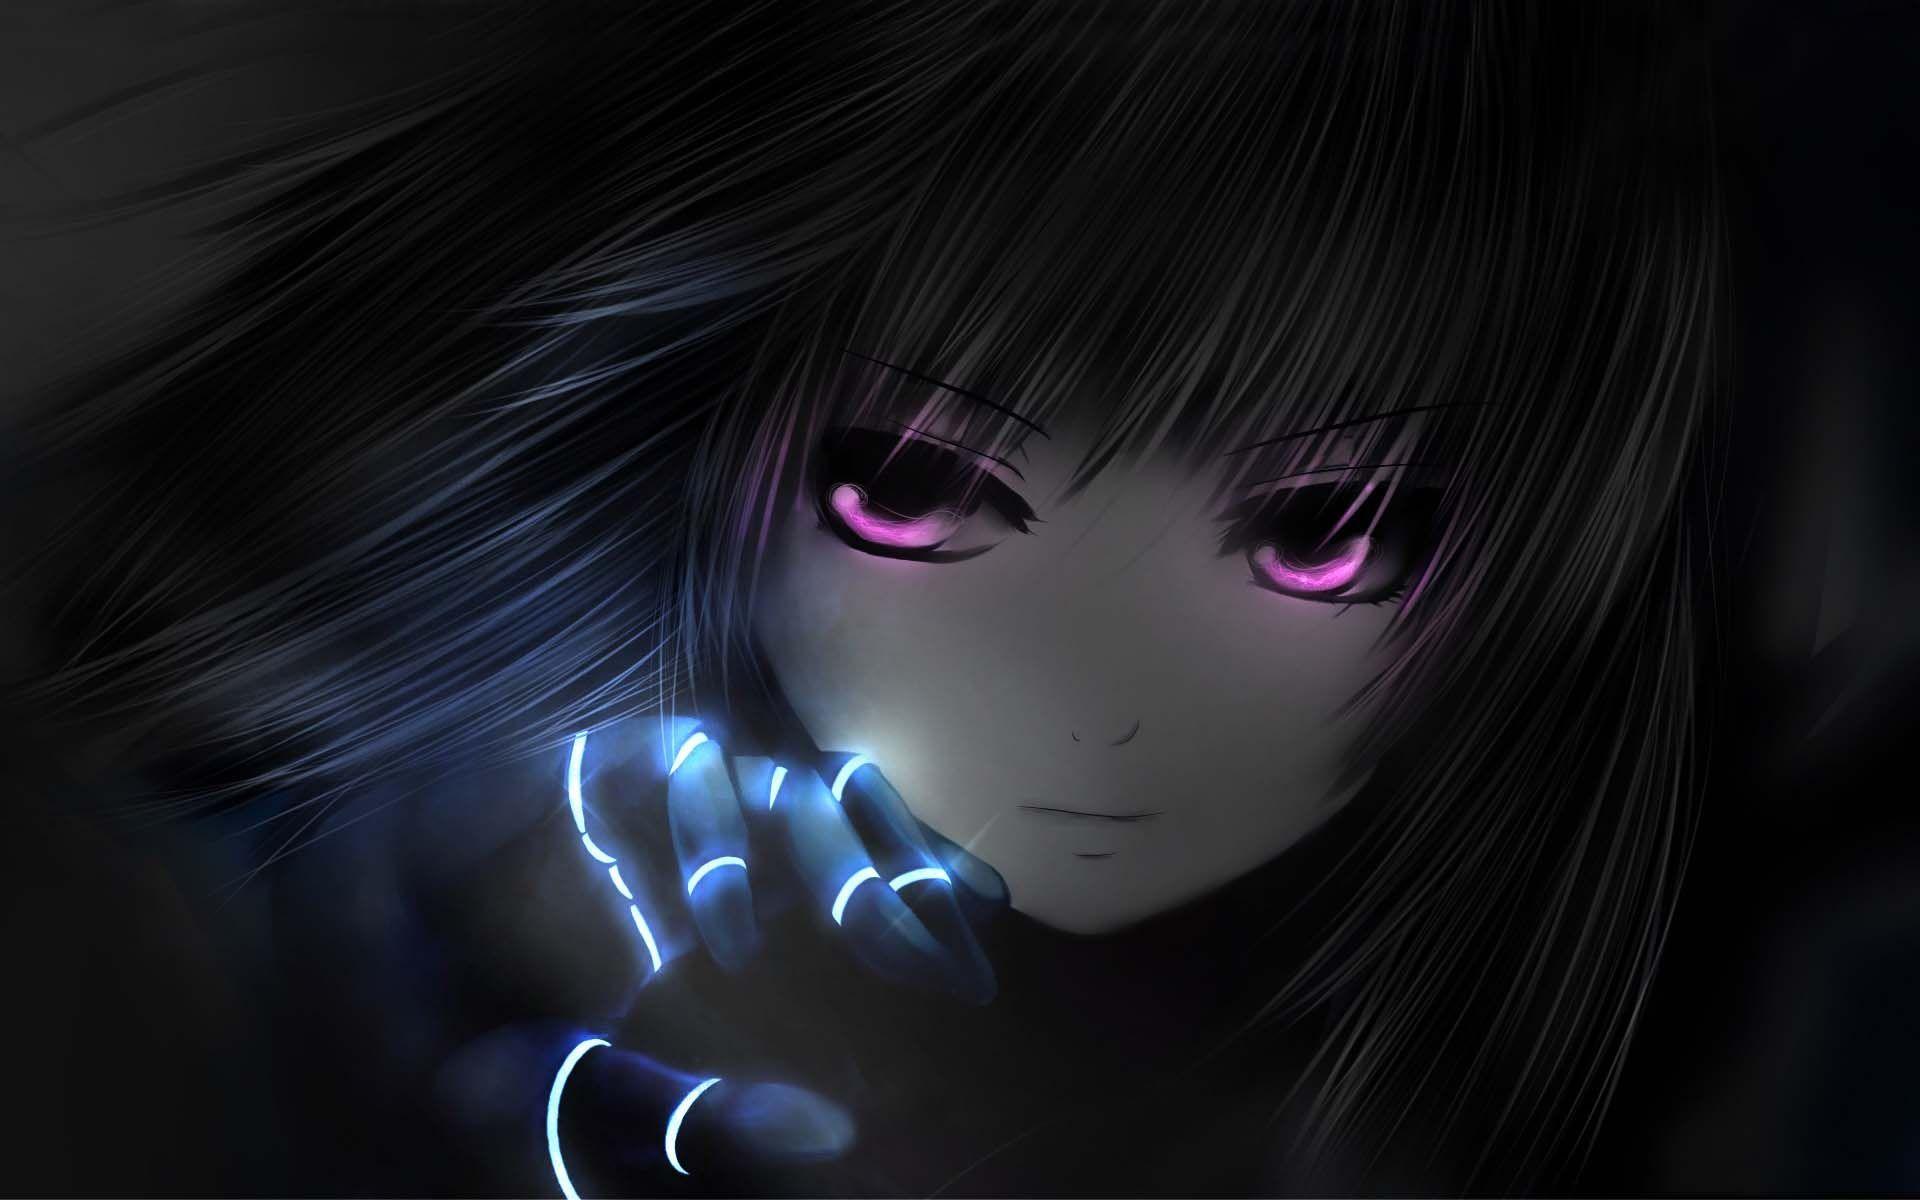 Dark Anime Hd Wallpapers For Mobile